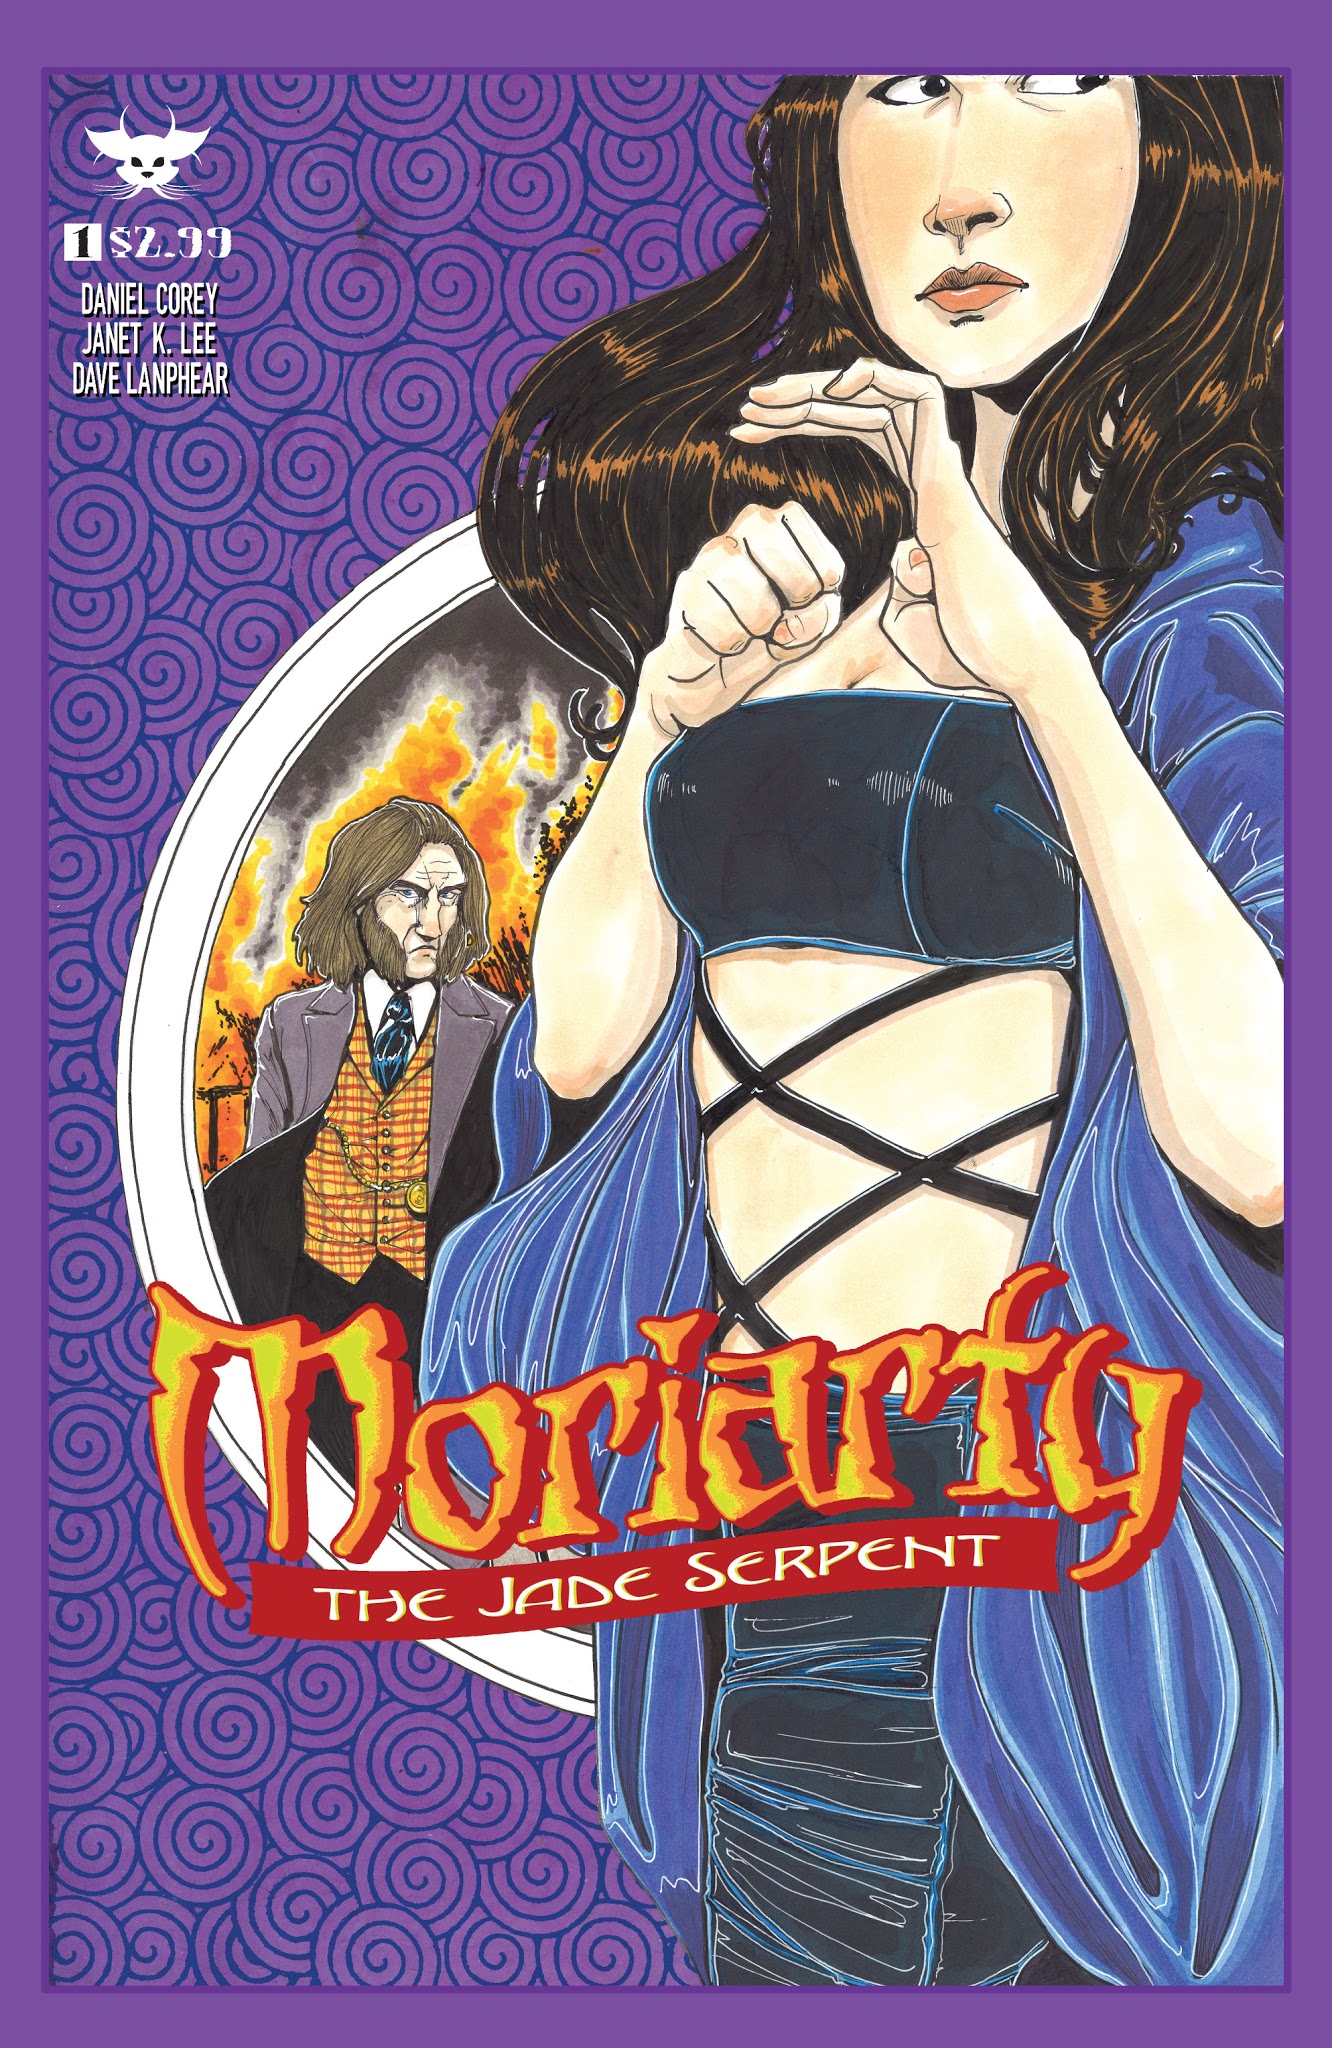 Read online Moriarty: The Jade Serpent comic -  Issue # Full - 1